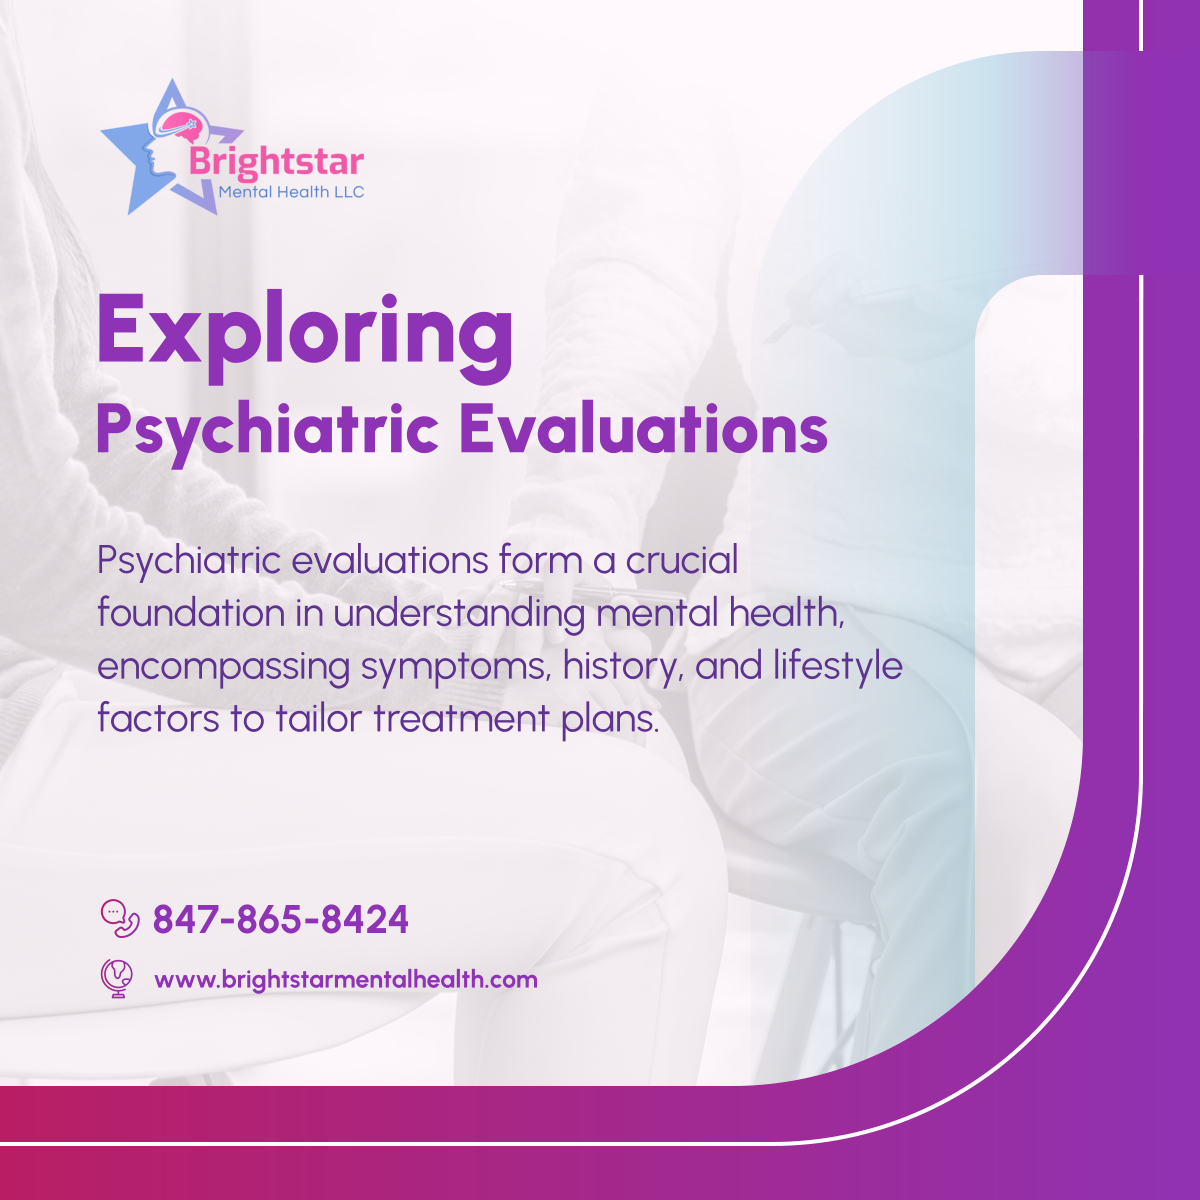 A psychiatric evaluation is more than a conversation; it's a stepping stone towards personalized mental health care. Discovering the root causes to navigate the path to wellness together. 

#ChicagoTherapy #IllinoisTherapist #BehavioralHealthCare #PsychiatricEvaluation